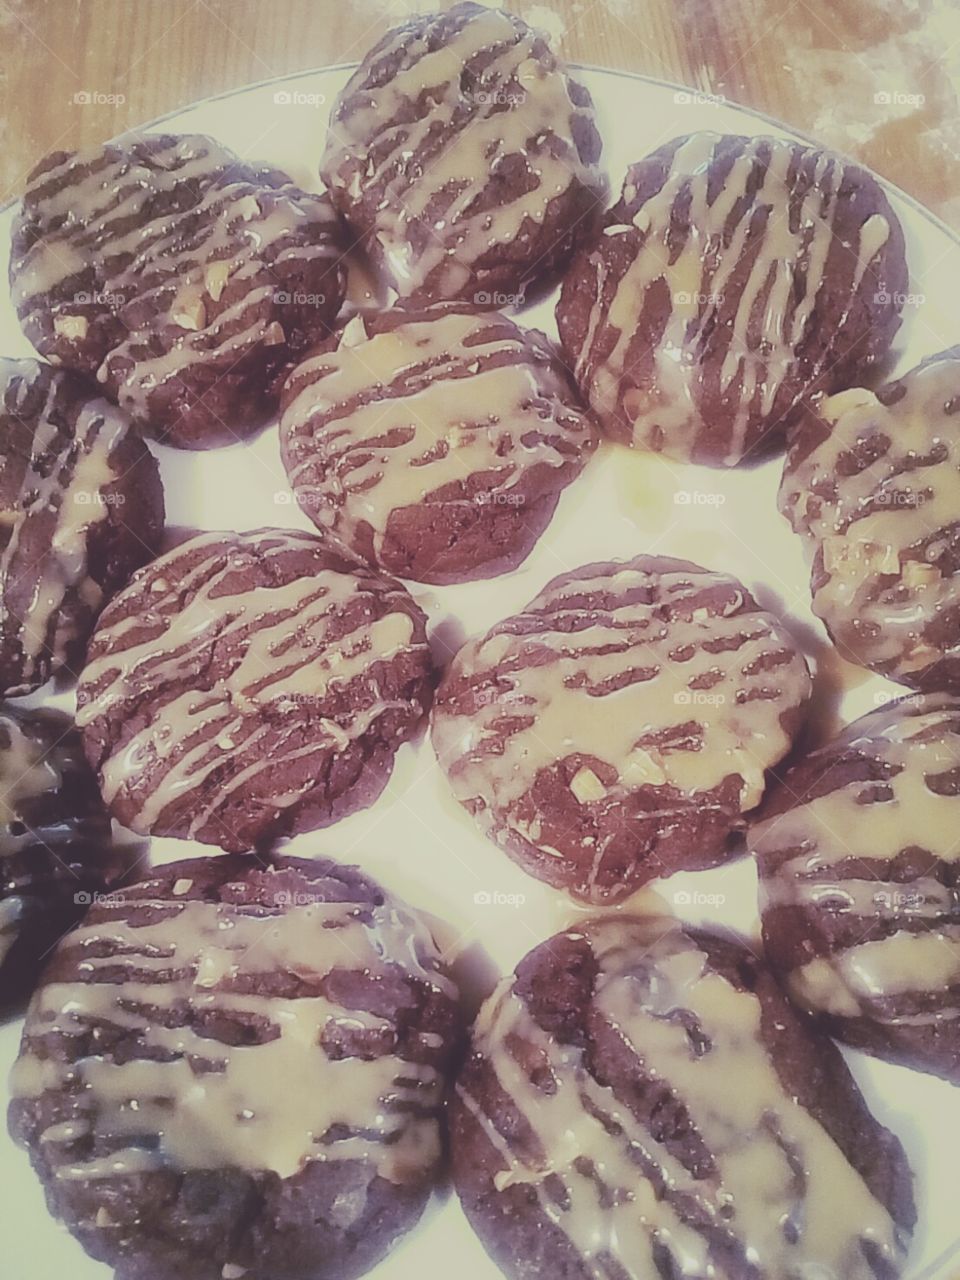 Freshly Baked Chocolate Almond Cookies, lightly drizzled with some Peanut Butter Glaze.